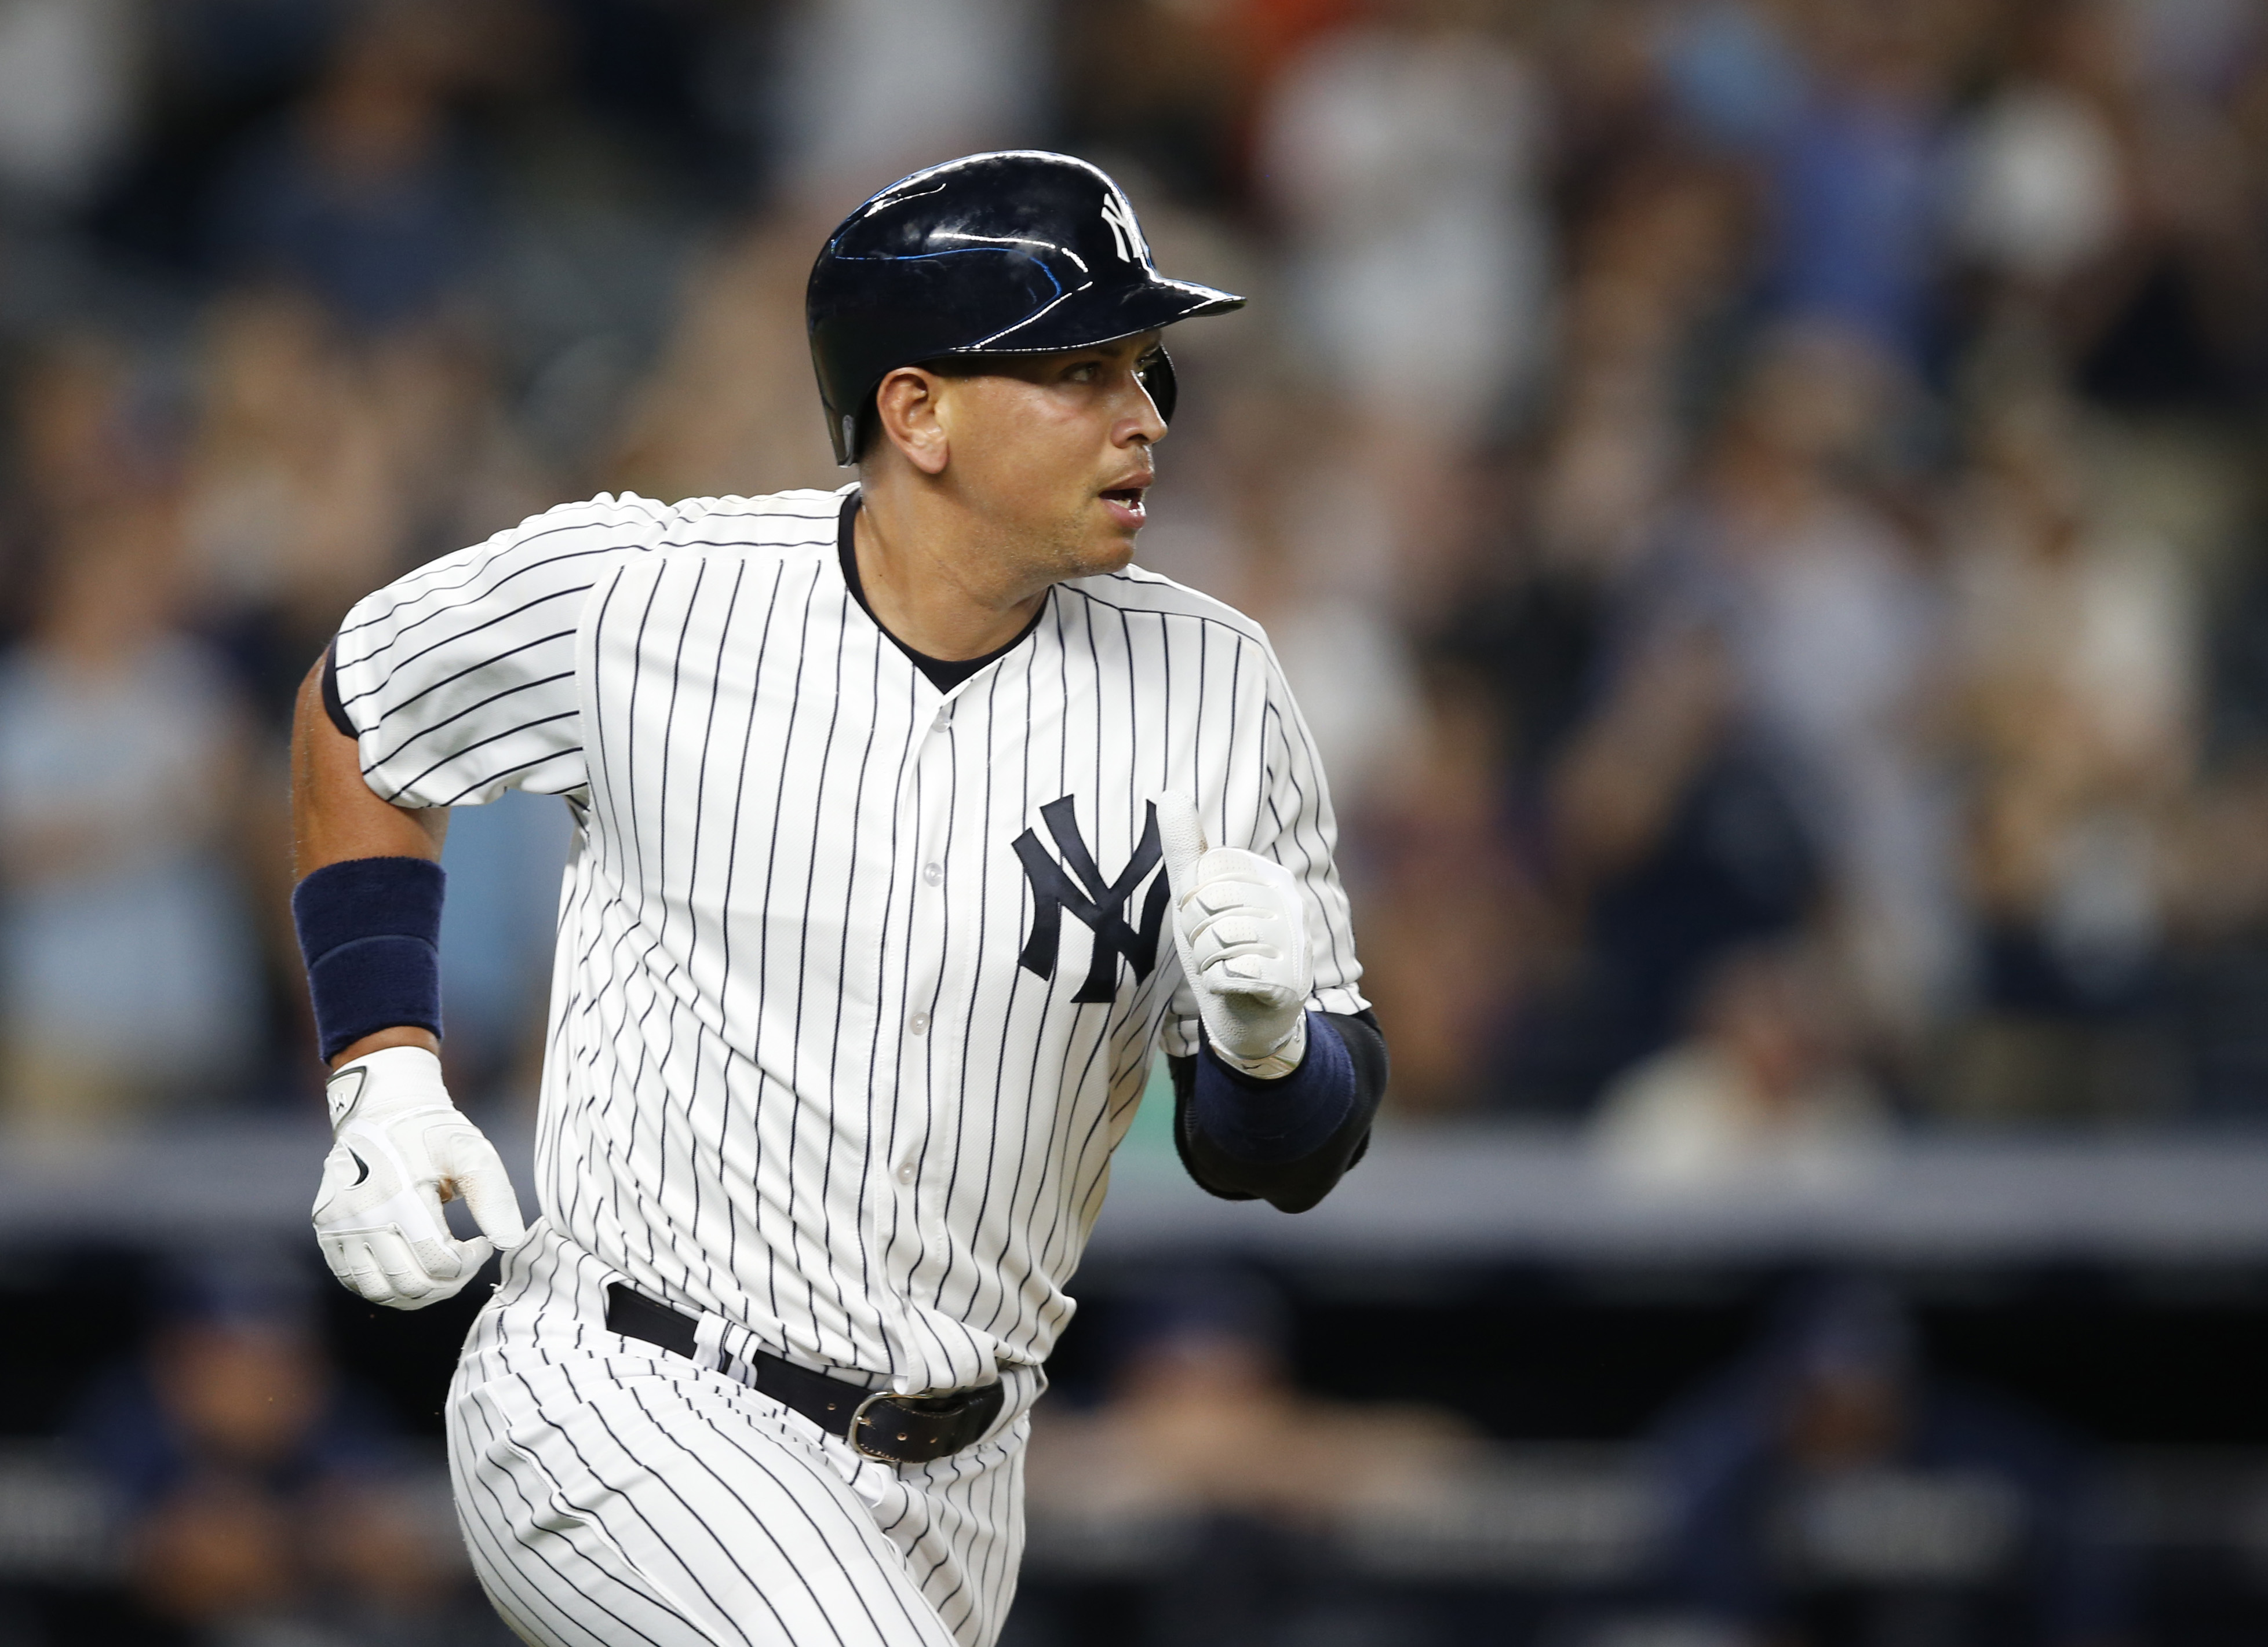 ARod plays final game for the Yankees "This is a night I'll never